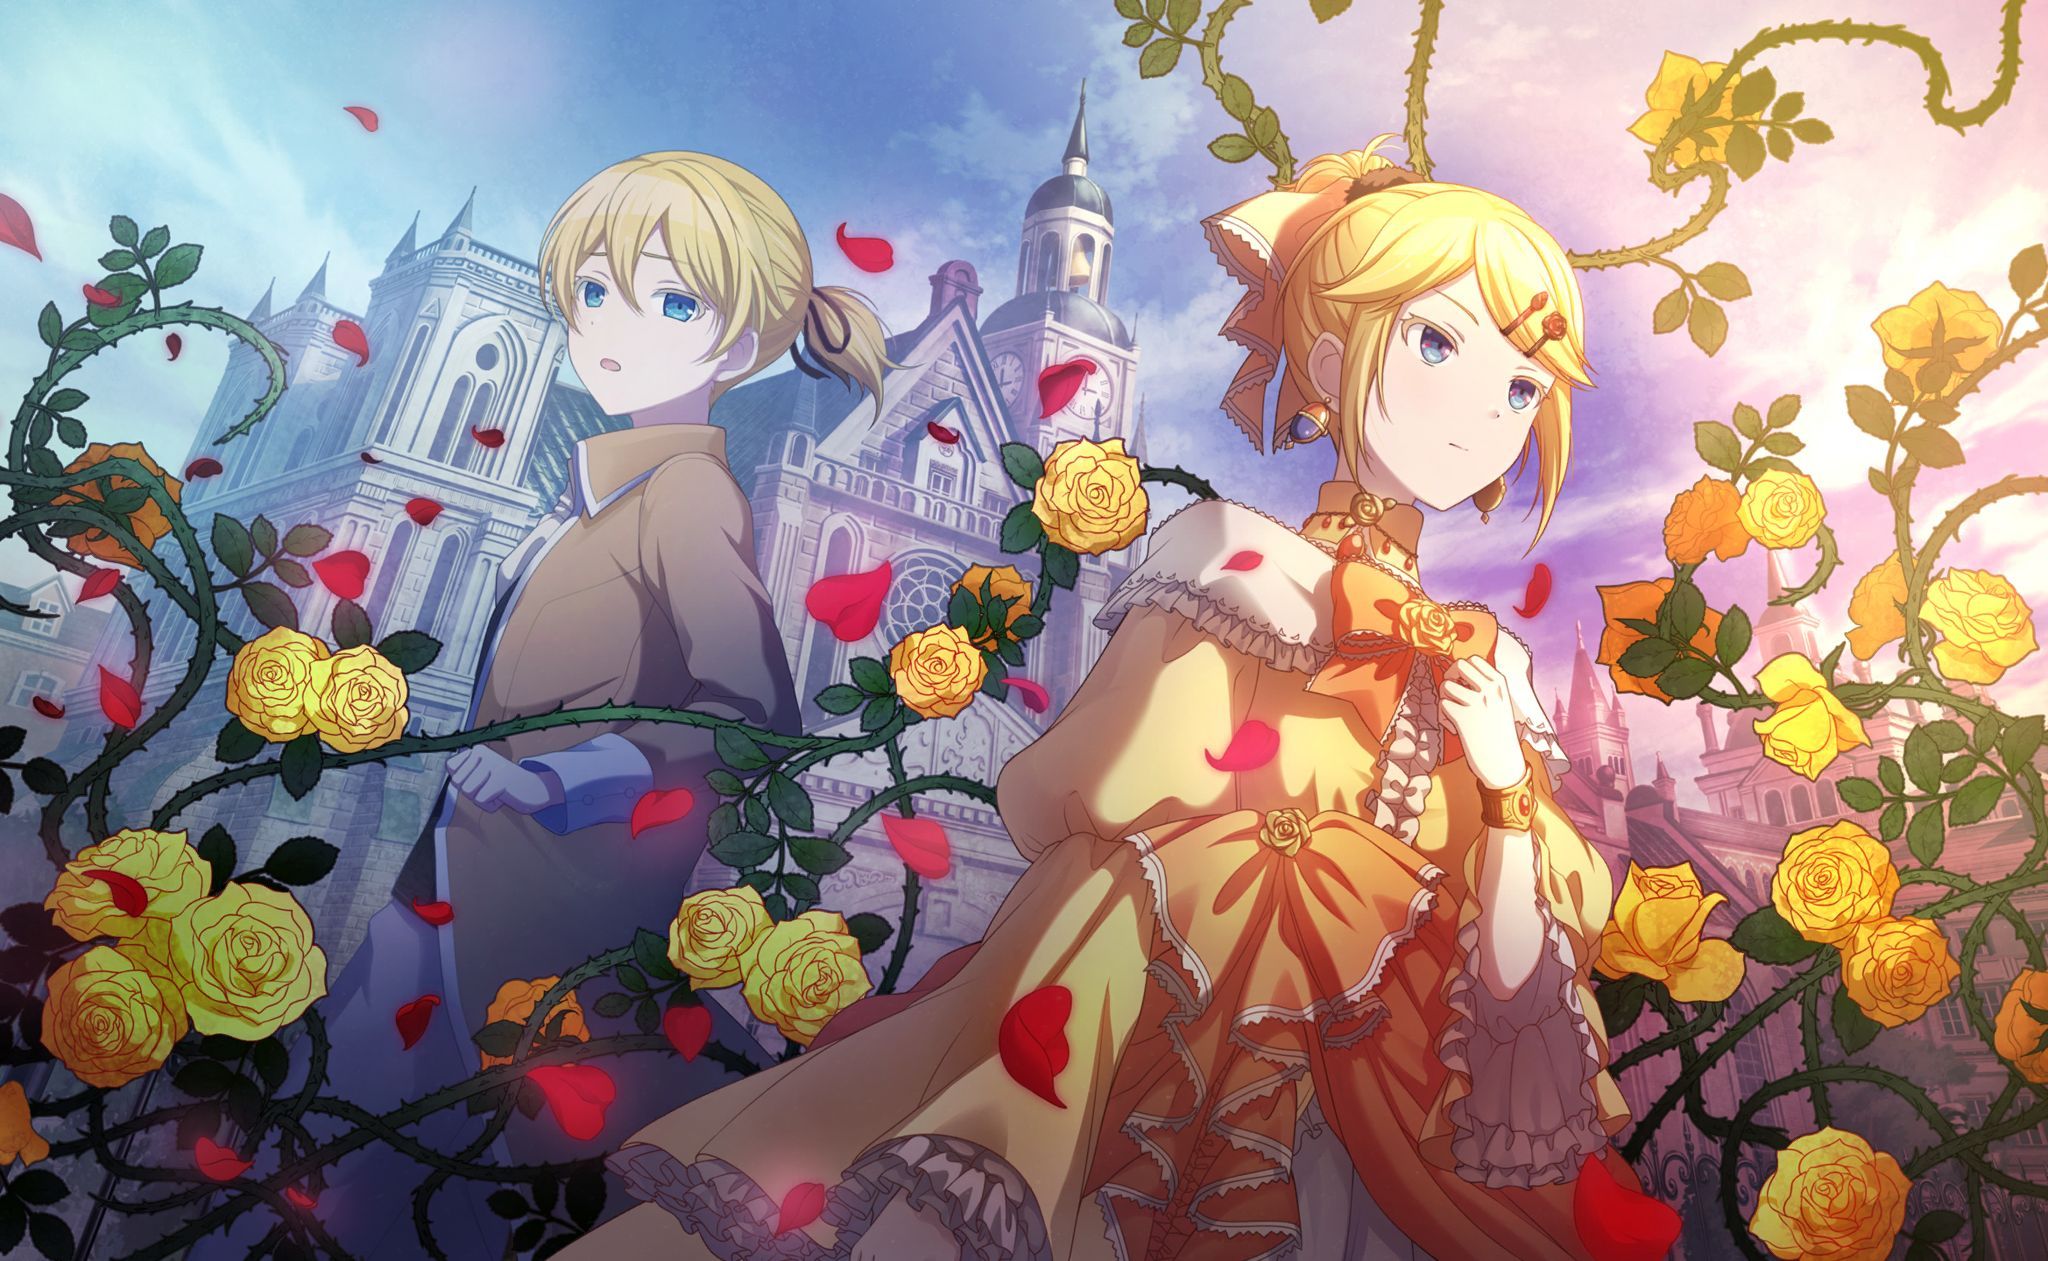 2 anime girls with blonde hair, one with blue eyes and the other with brown eyes, standing in front of a castle with yellow roses and red rose petals. - 